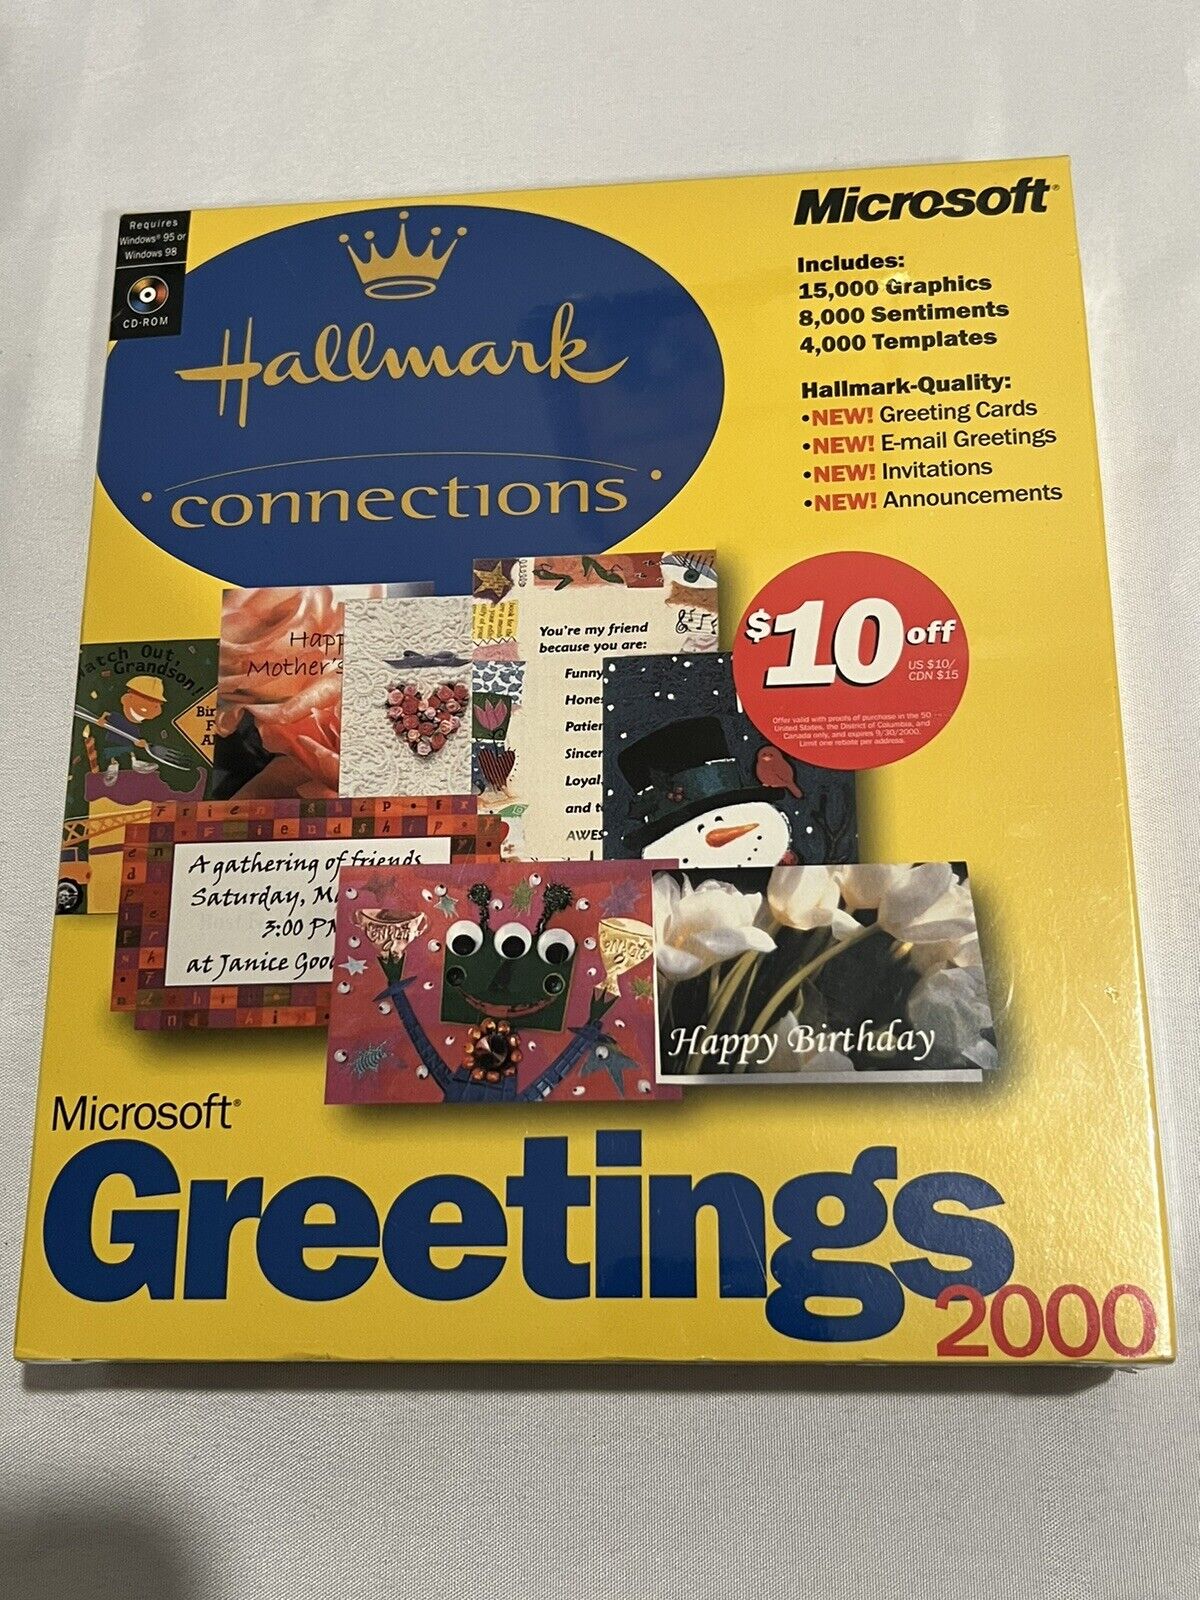 Microsoft Greetings 2000 Hallmark Connections CD ROM Old Software DIY Cards